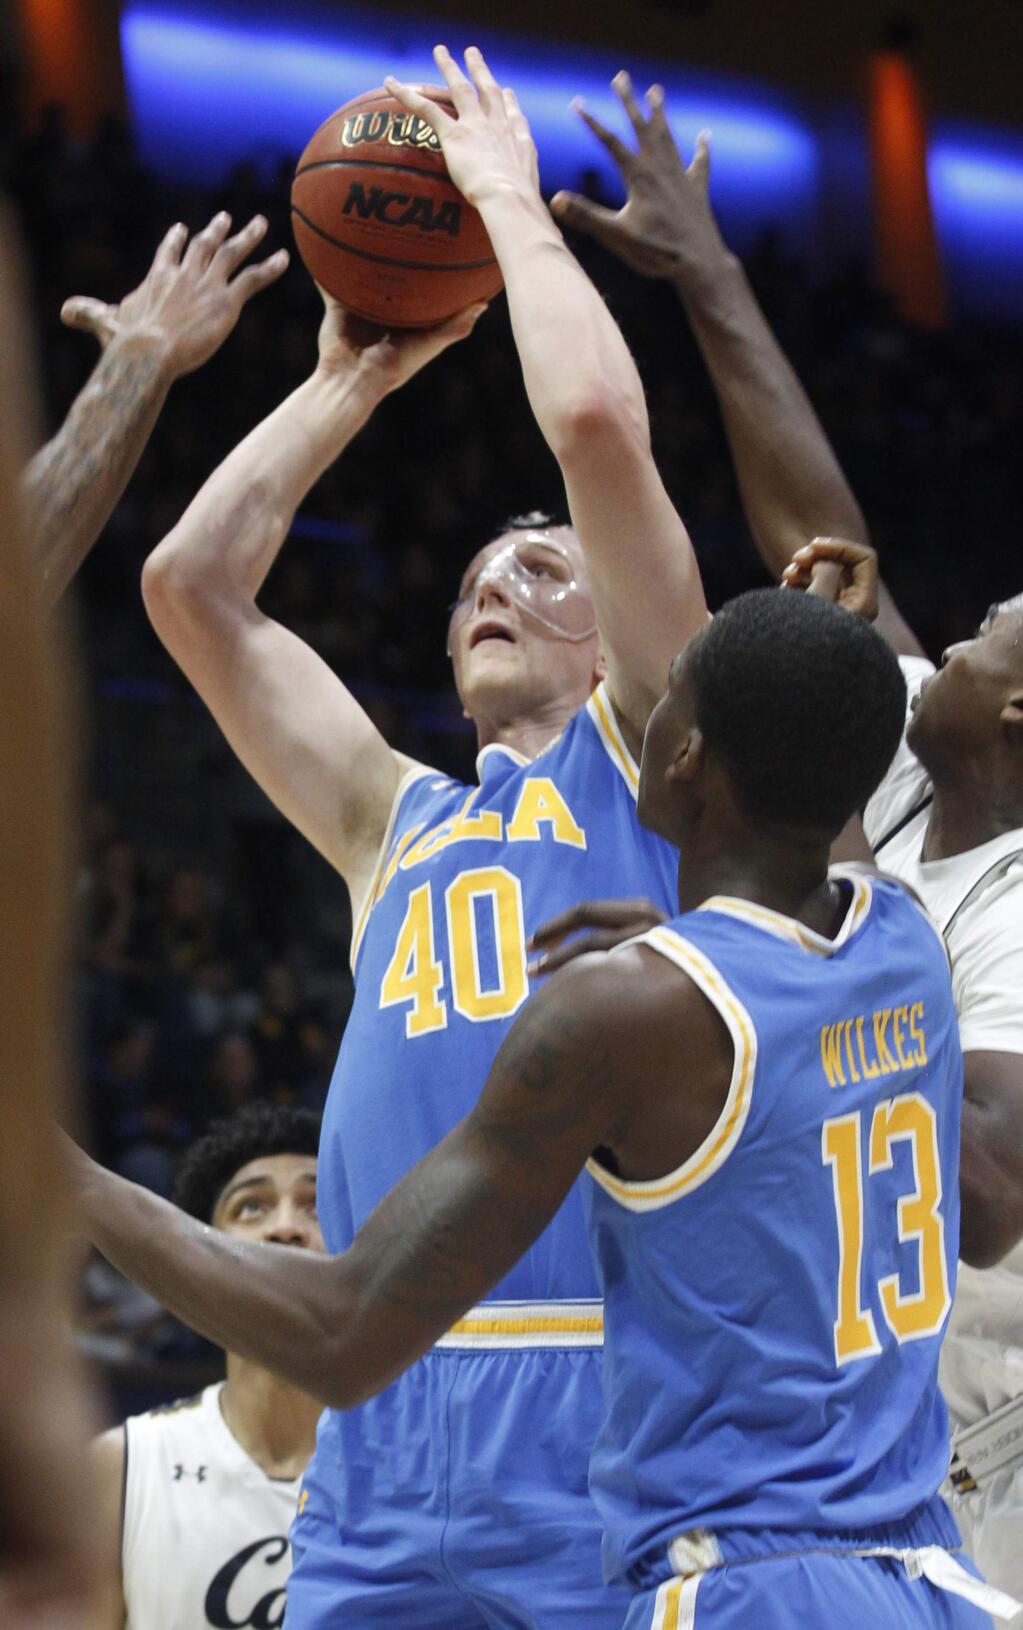 UCLA's Thomas Welsh (40) shoots in front of teammate Kris Wilkes (13) as California's Juhwan Harris-Dyson defends during the first half of an NCAA college basketball game Saturday, Jan. 6, 2018, in Berkeley, Calif. (AP Photo/George Nikitin)